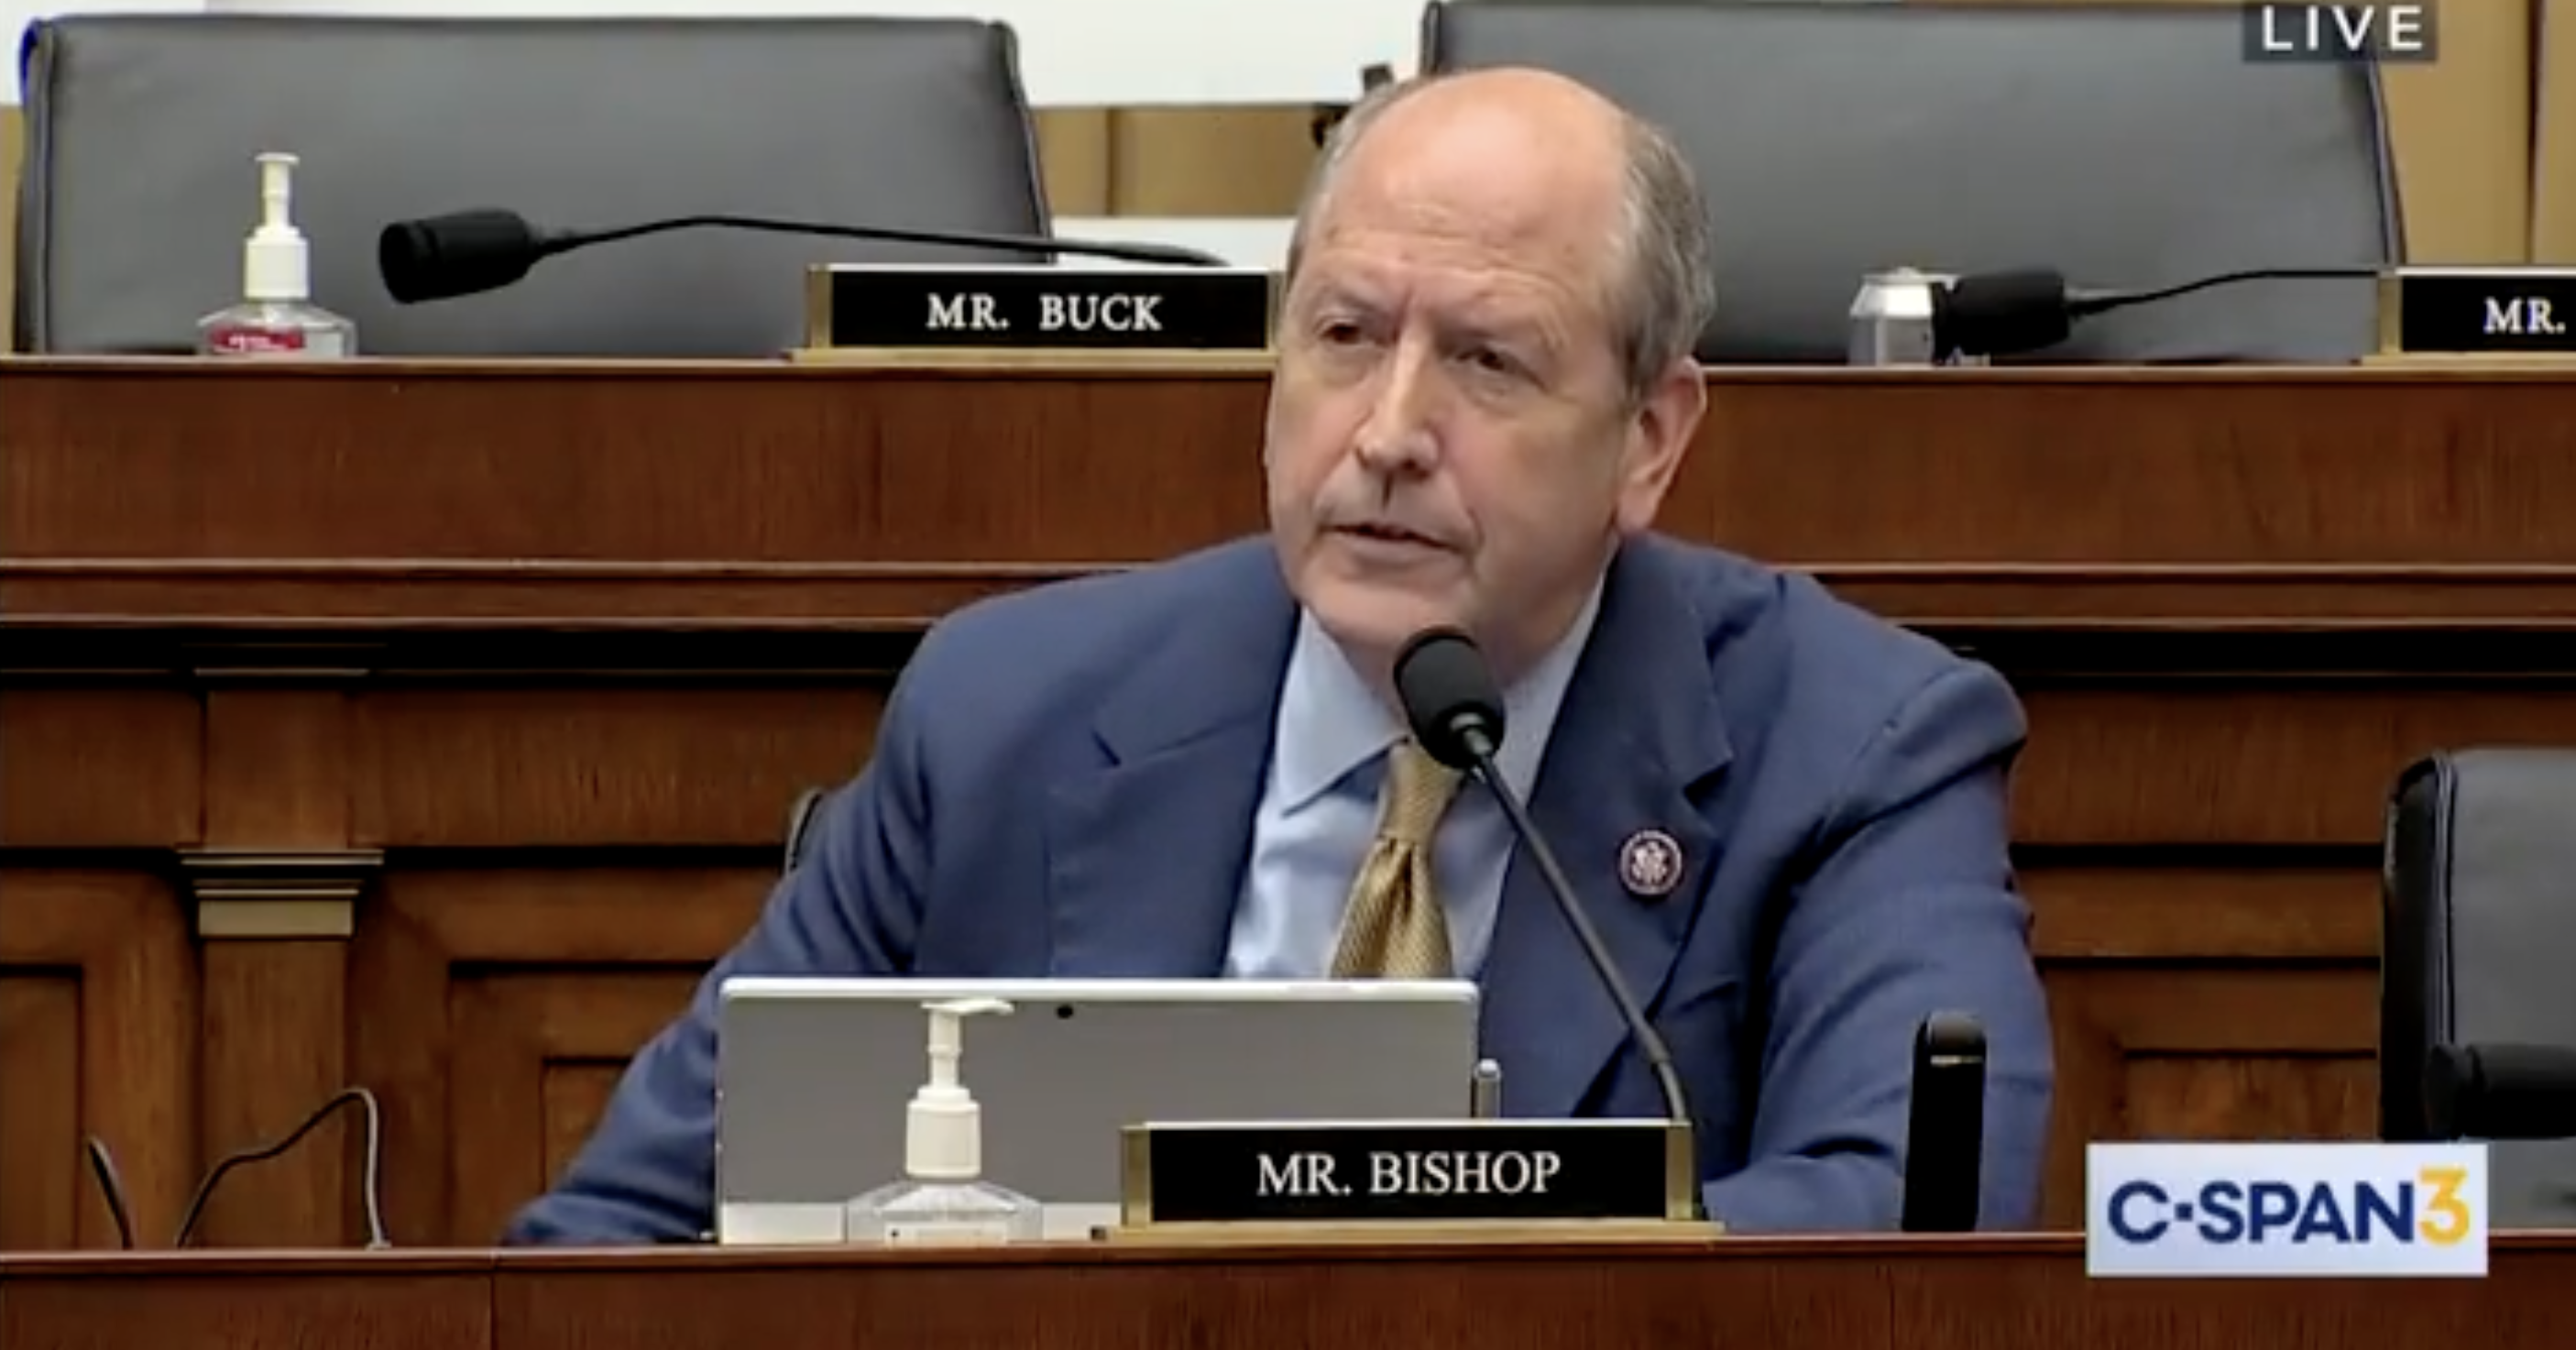 Yelling About Throwing Out ‘Baby Parts’ to Asking About ‘Raped’ Daughters: 5 Brutal Clips From House Abortion Access Hearing